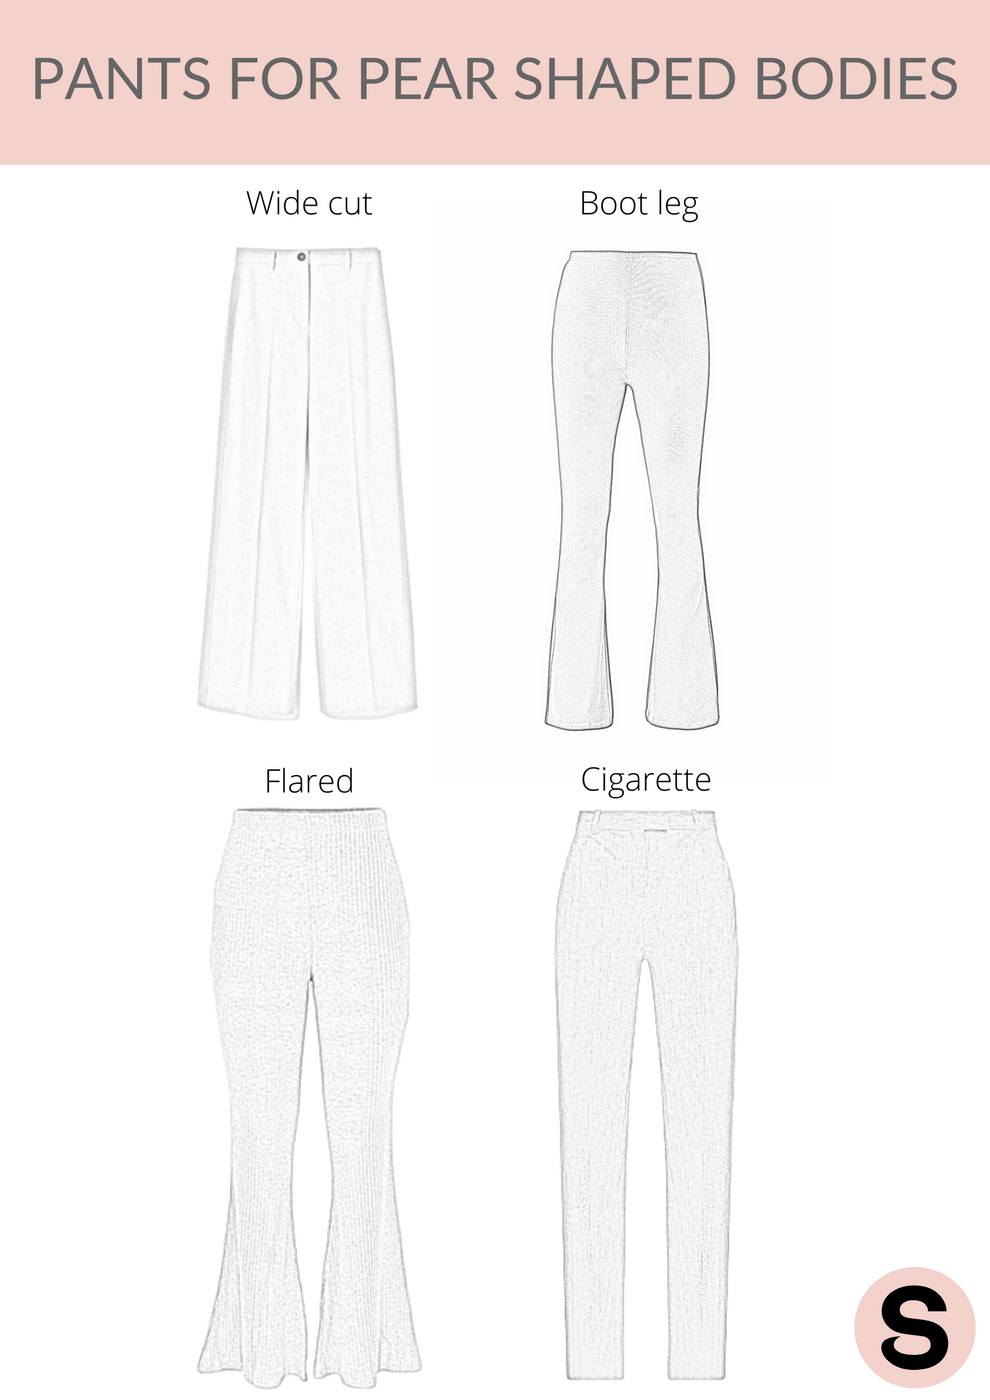 Ask a Stylist: Finding Work Pants for Different Body Types